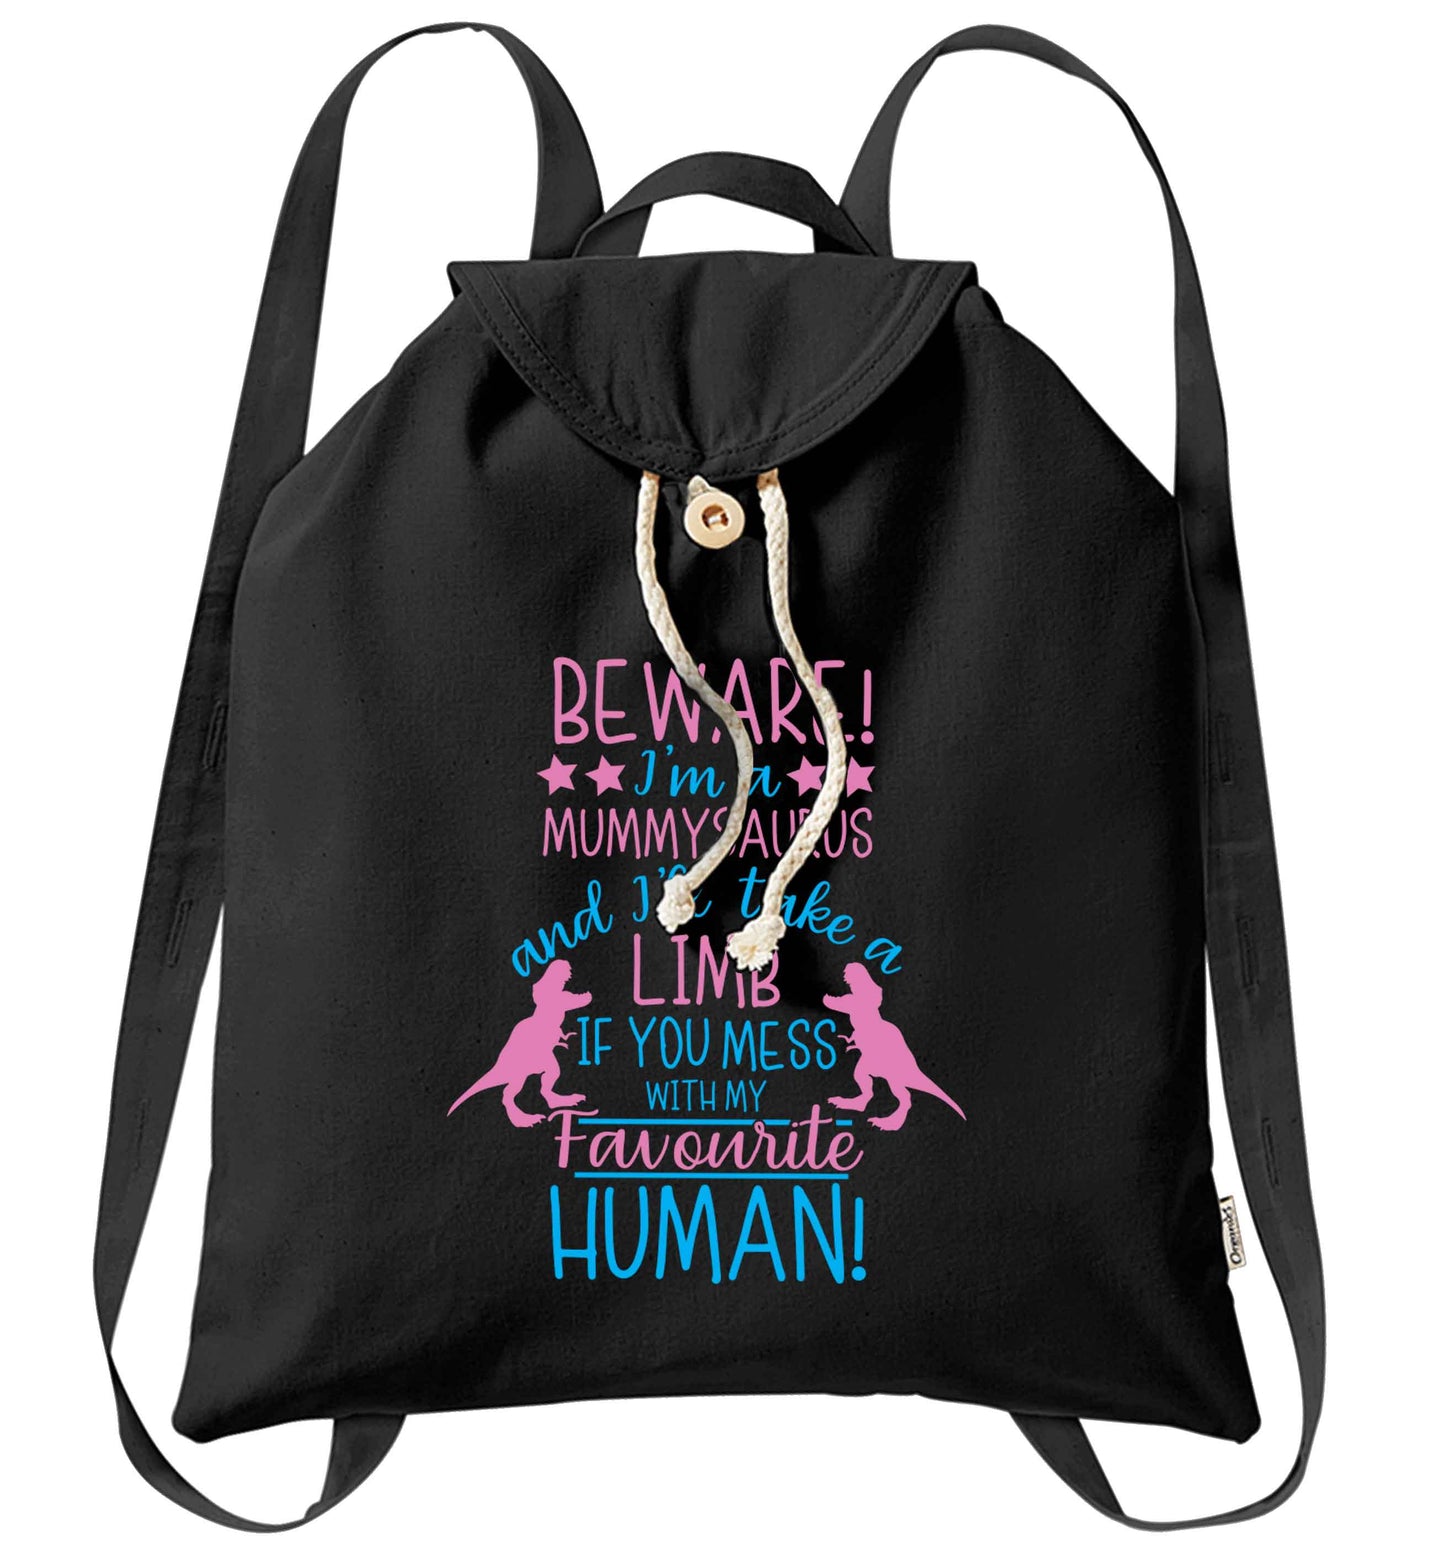 Perfect gift for any protective mummysaurus! Beware I'm a mummysaurus and I'll take a limb if you mess with my favourite human organic cotton backpack tote with wooden buttons in black